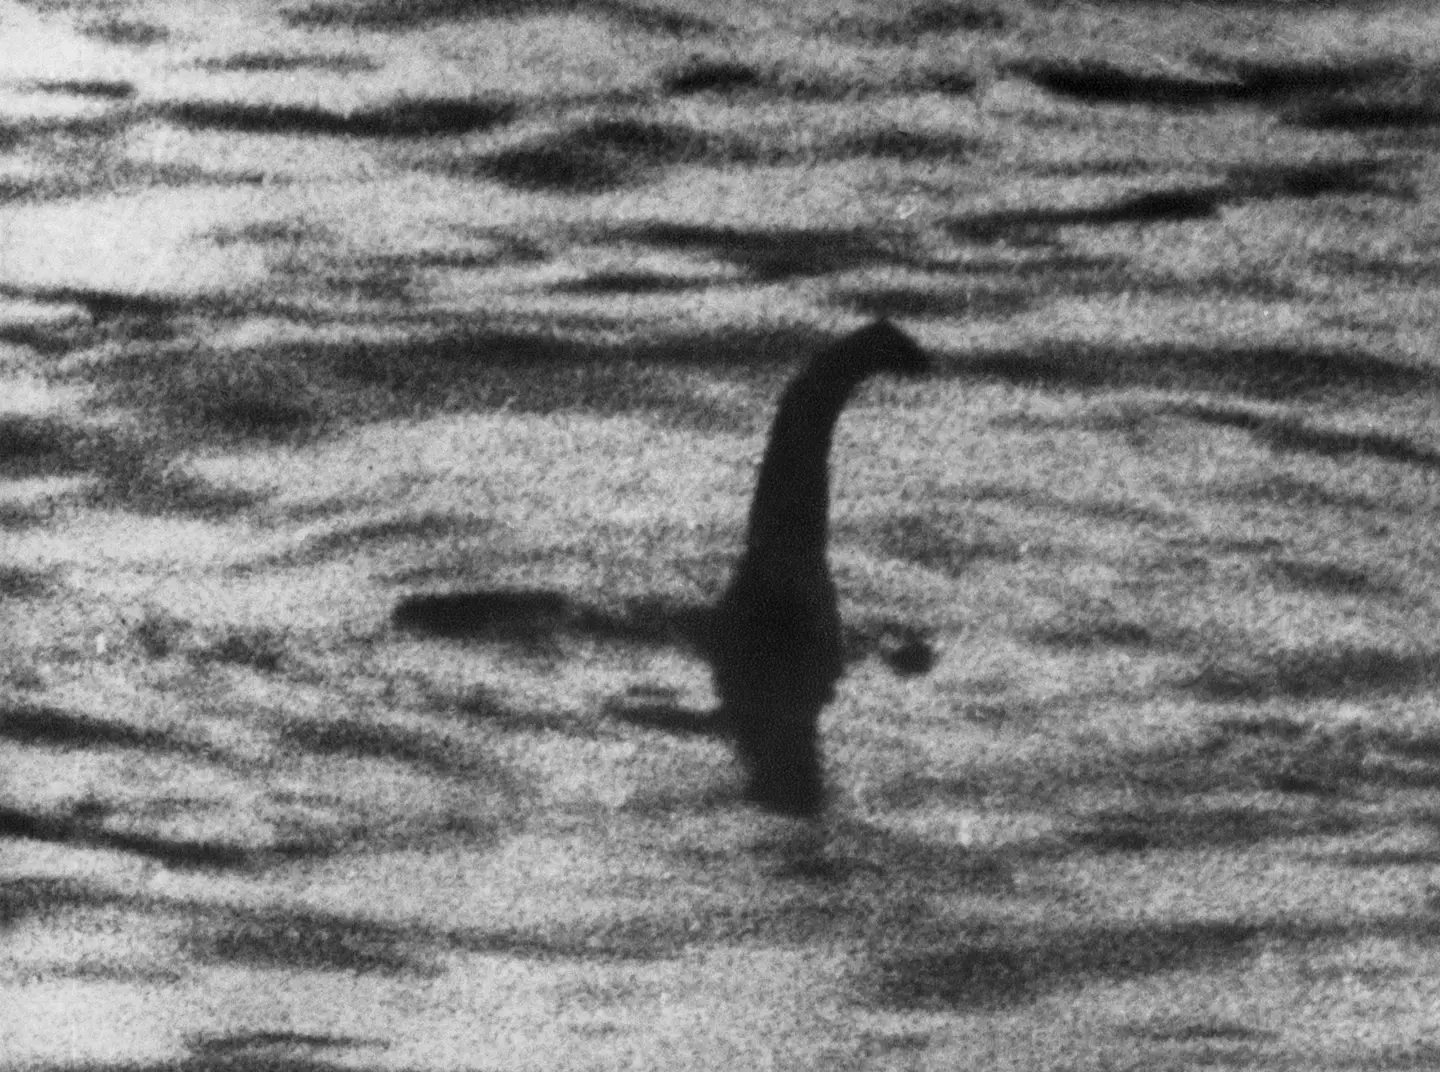 The alleged Loch Ness Monster was first documented in a biography in 565 AD.